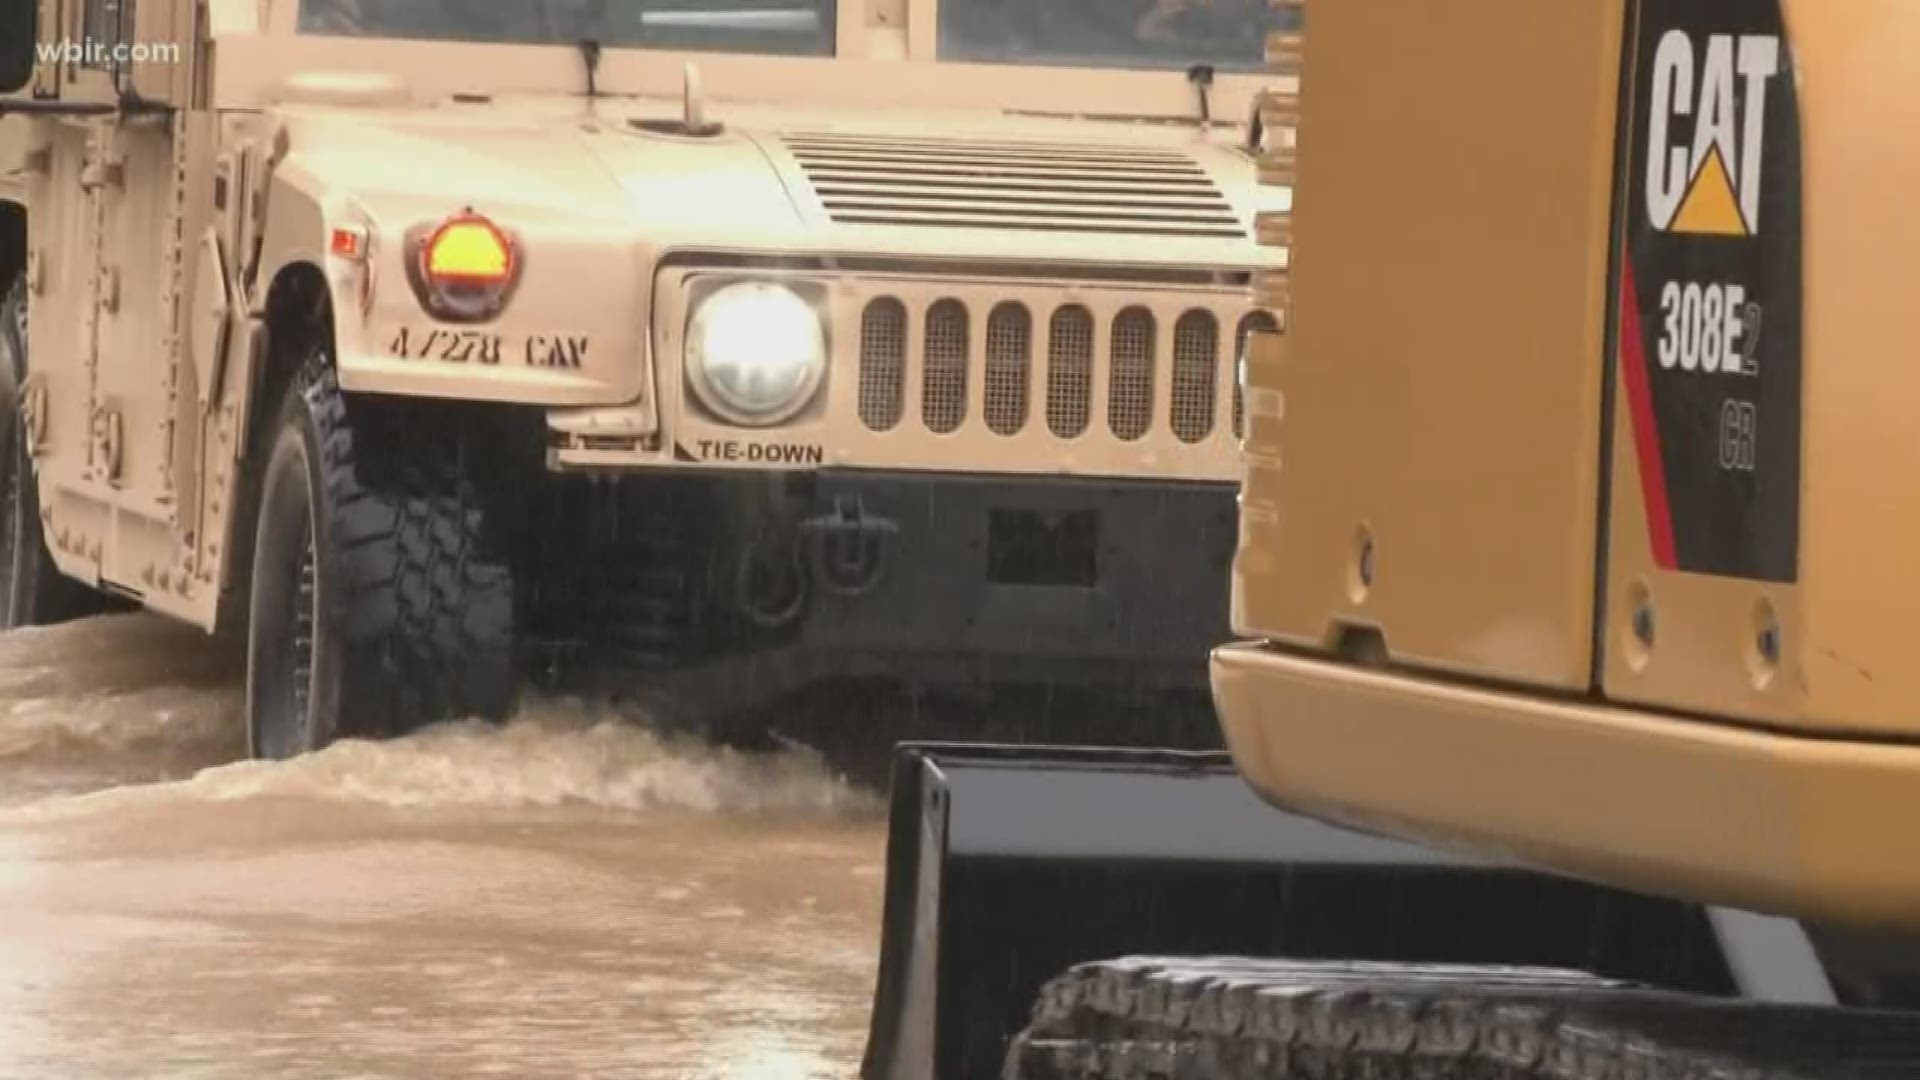 The National Guard is assisting people in Cocke County after roads completely flooded.